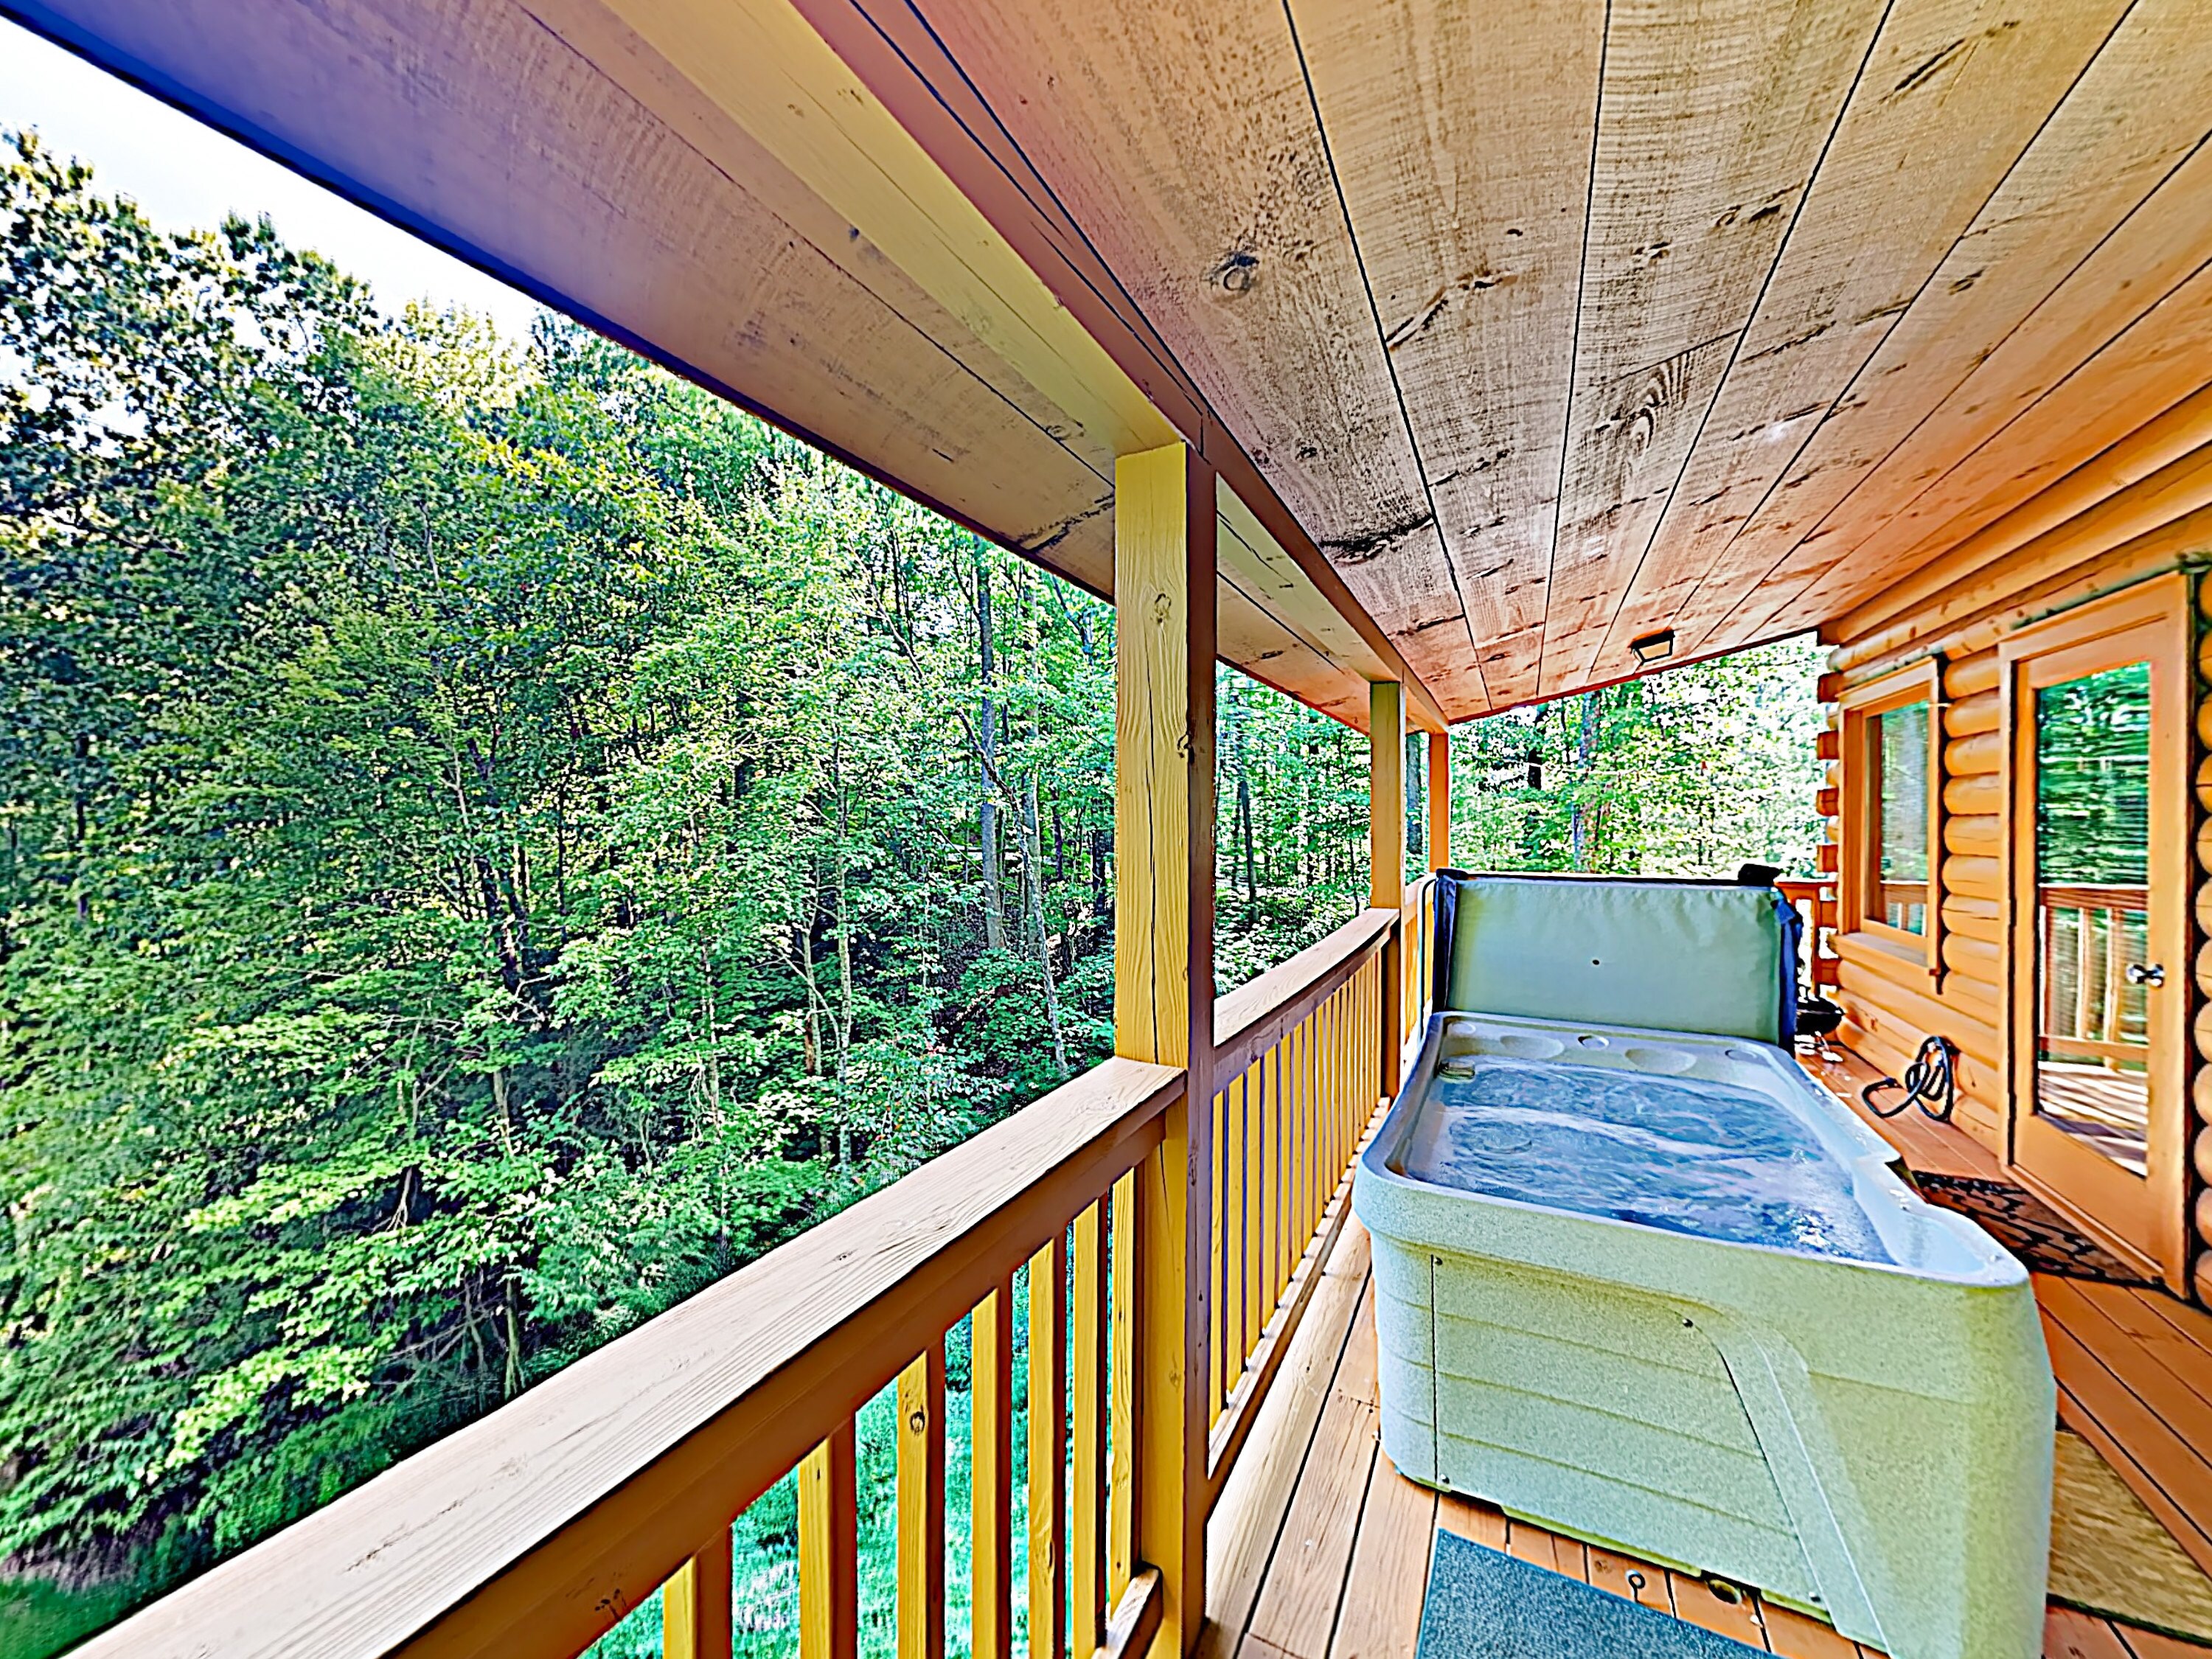 Both units offer large decks with scenic views.